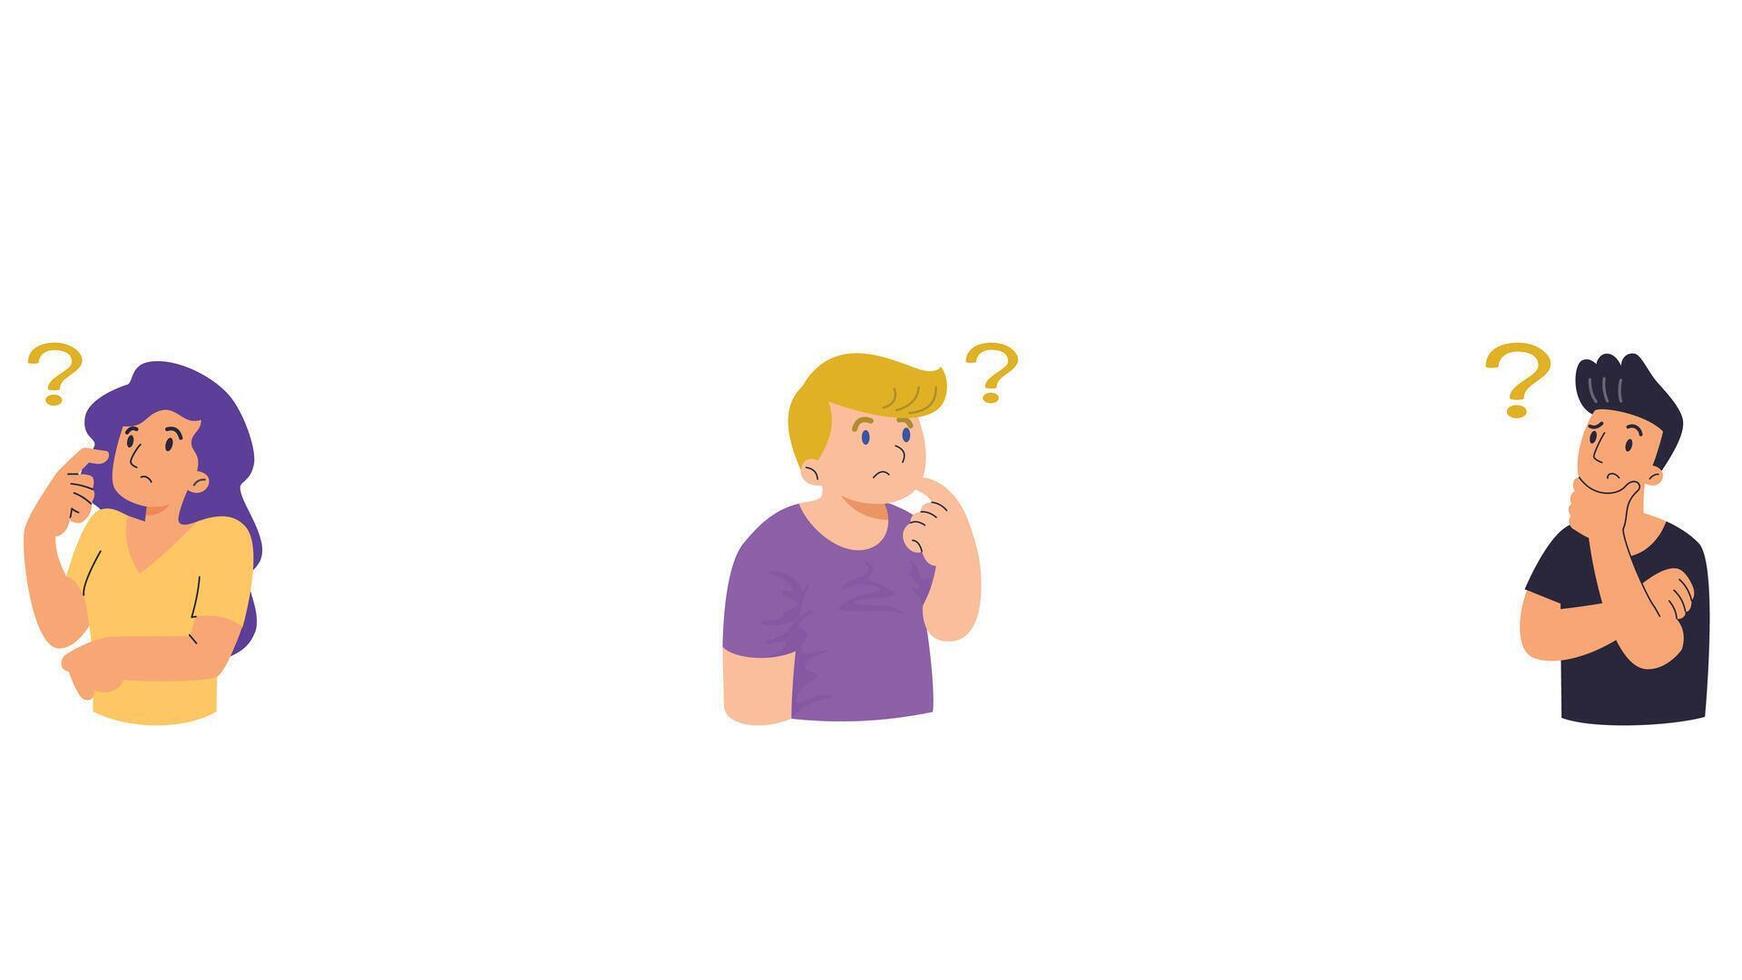 confused and challenged person with question mark on head, thinking person vector illustration